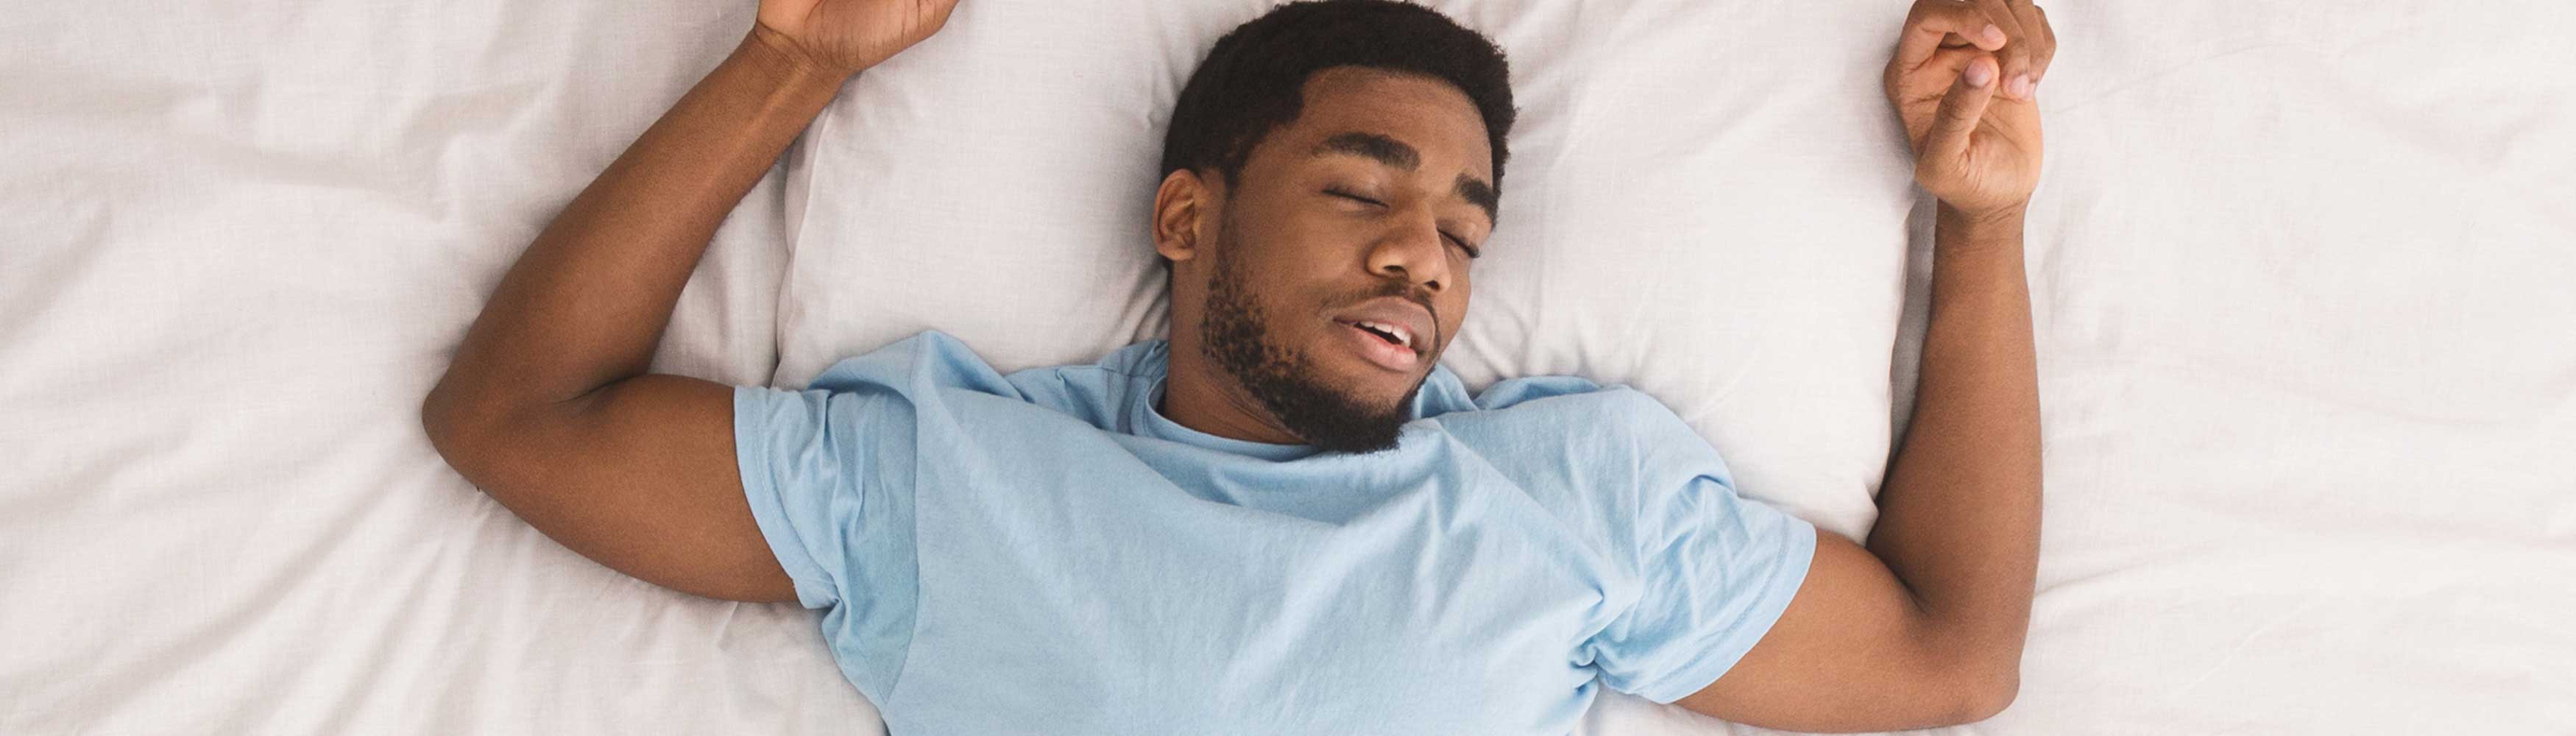 Man enjoying a relaxing moment in bed